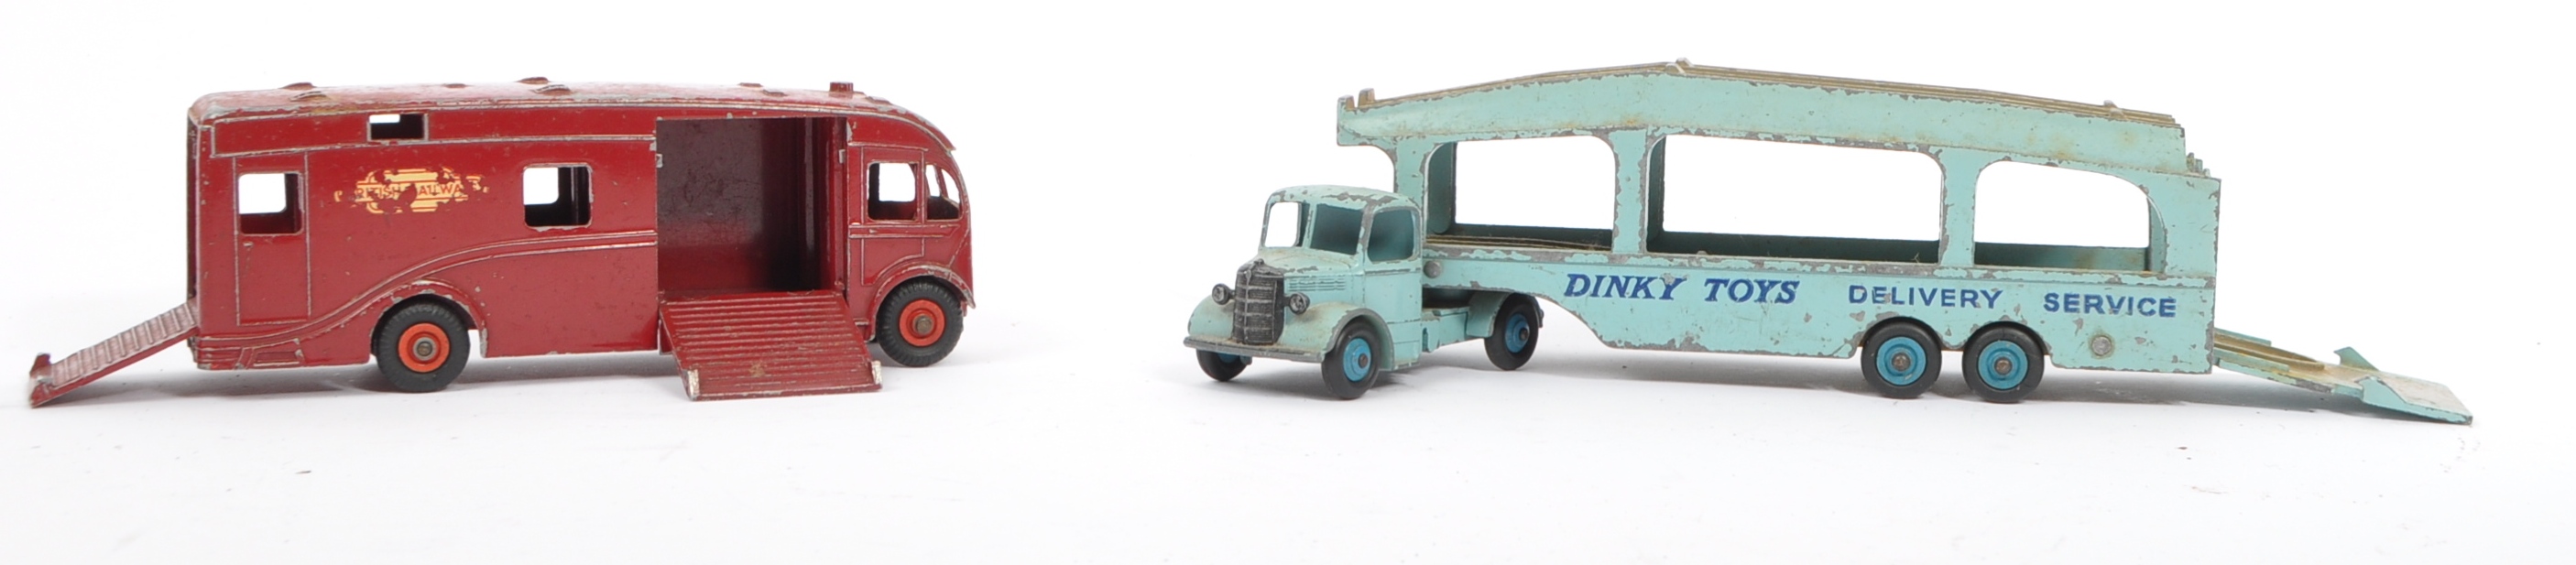 COLLECTION OF VINTAGE DINKY SUPERTOYS DIECAST MODELS - Image 5 of 5